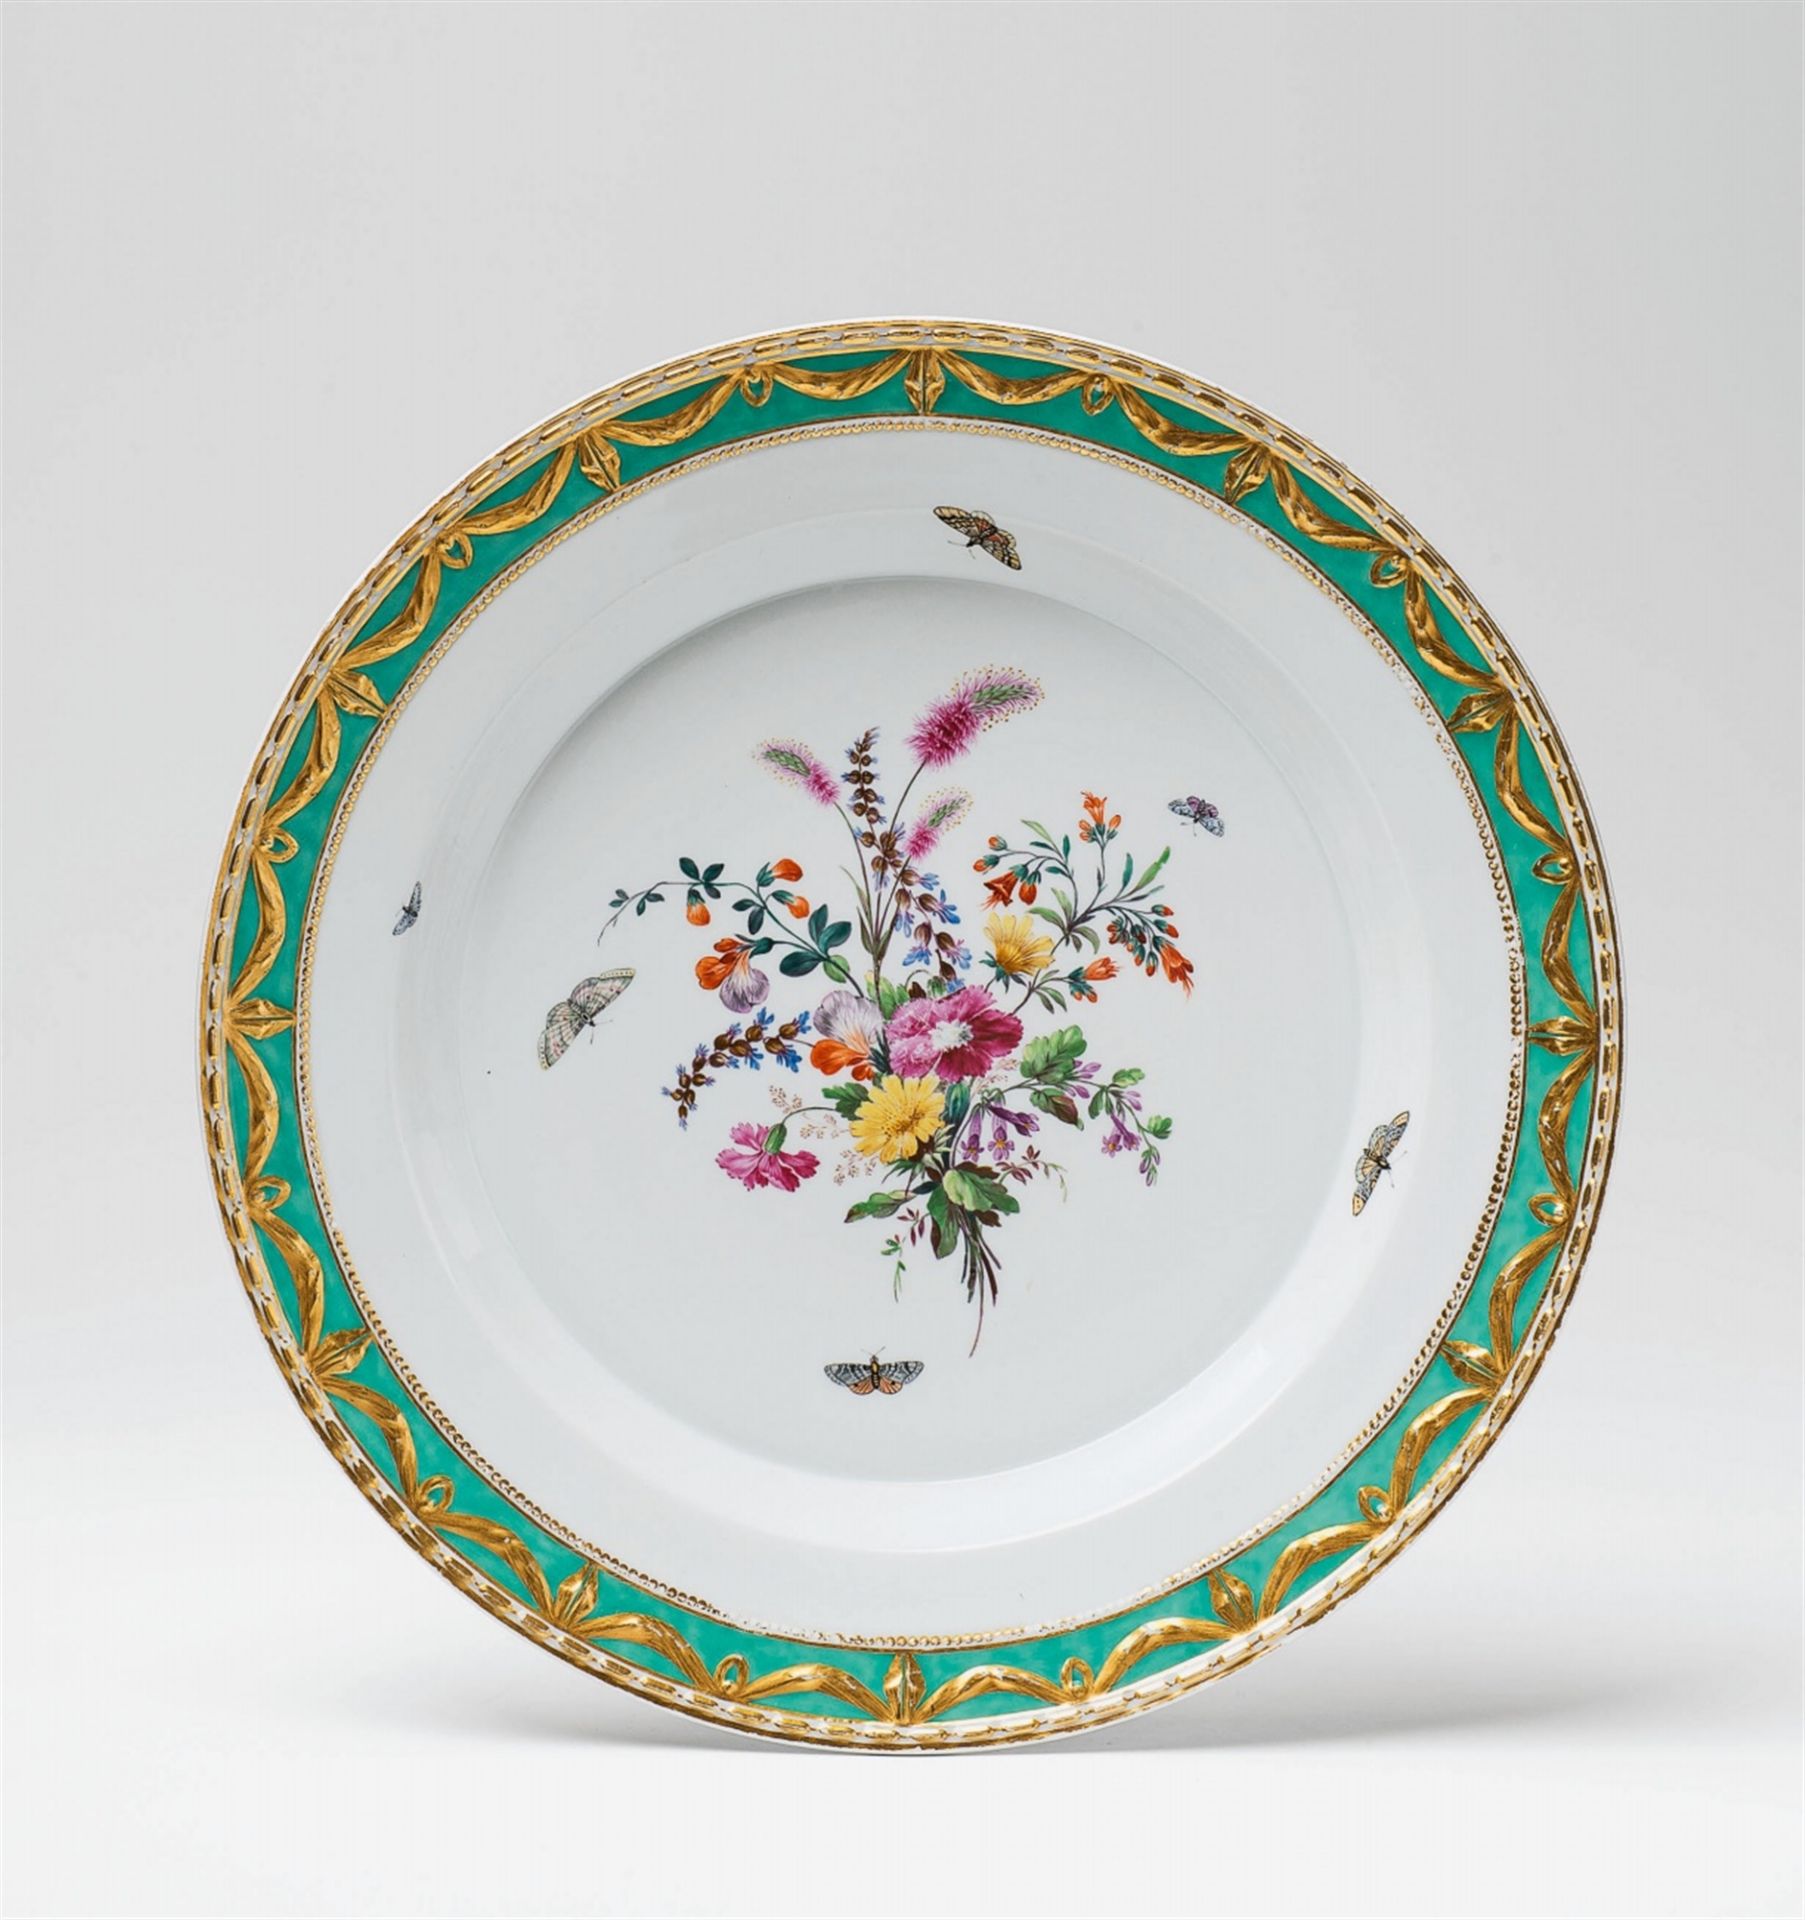 A large Berlin KPM porcelain platter from the dinner and dessert service made for Prince Henry of Pr